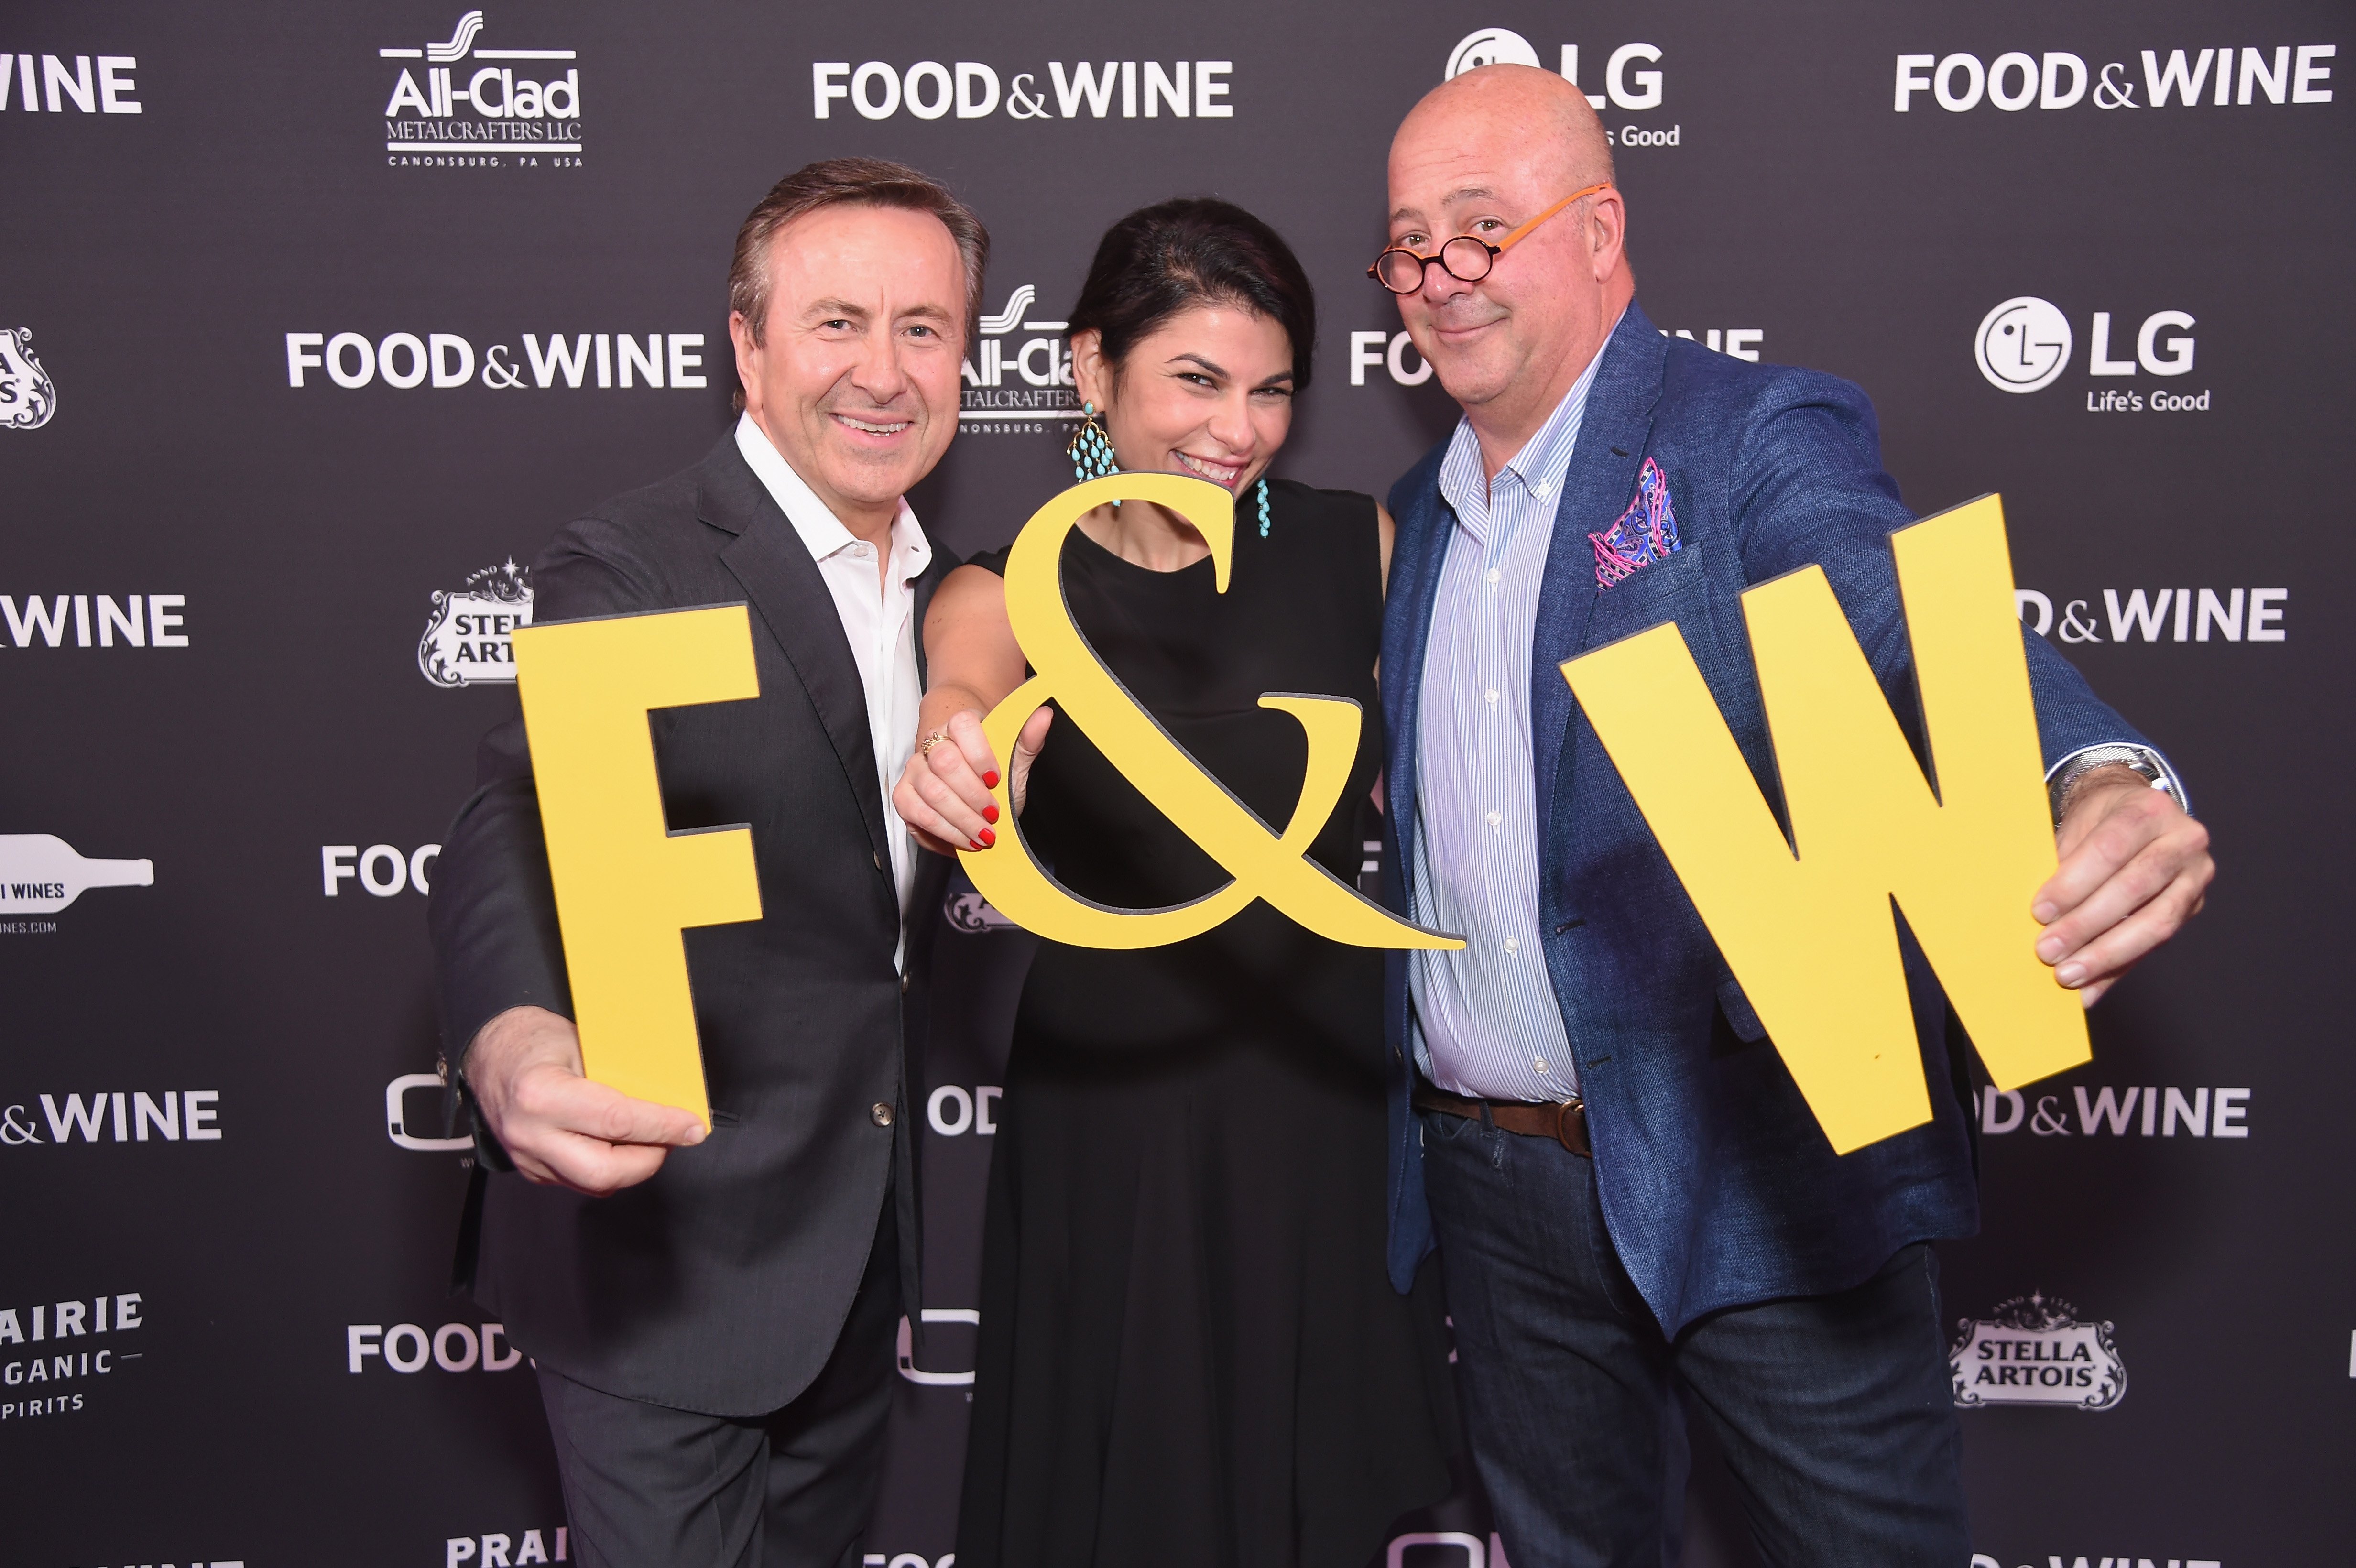 Chef Daniel Boulud, Nilou Motamed, Editor of Time Inc.'s Food & Wine, and Andrew Zimmern attend the Food & Wine Celebration of the 2017 | Source: Getty Images